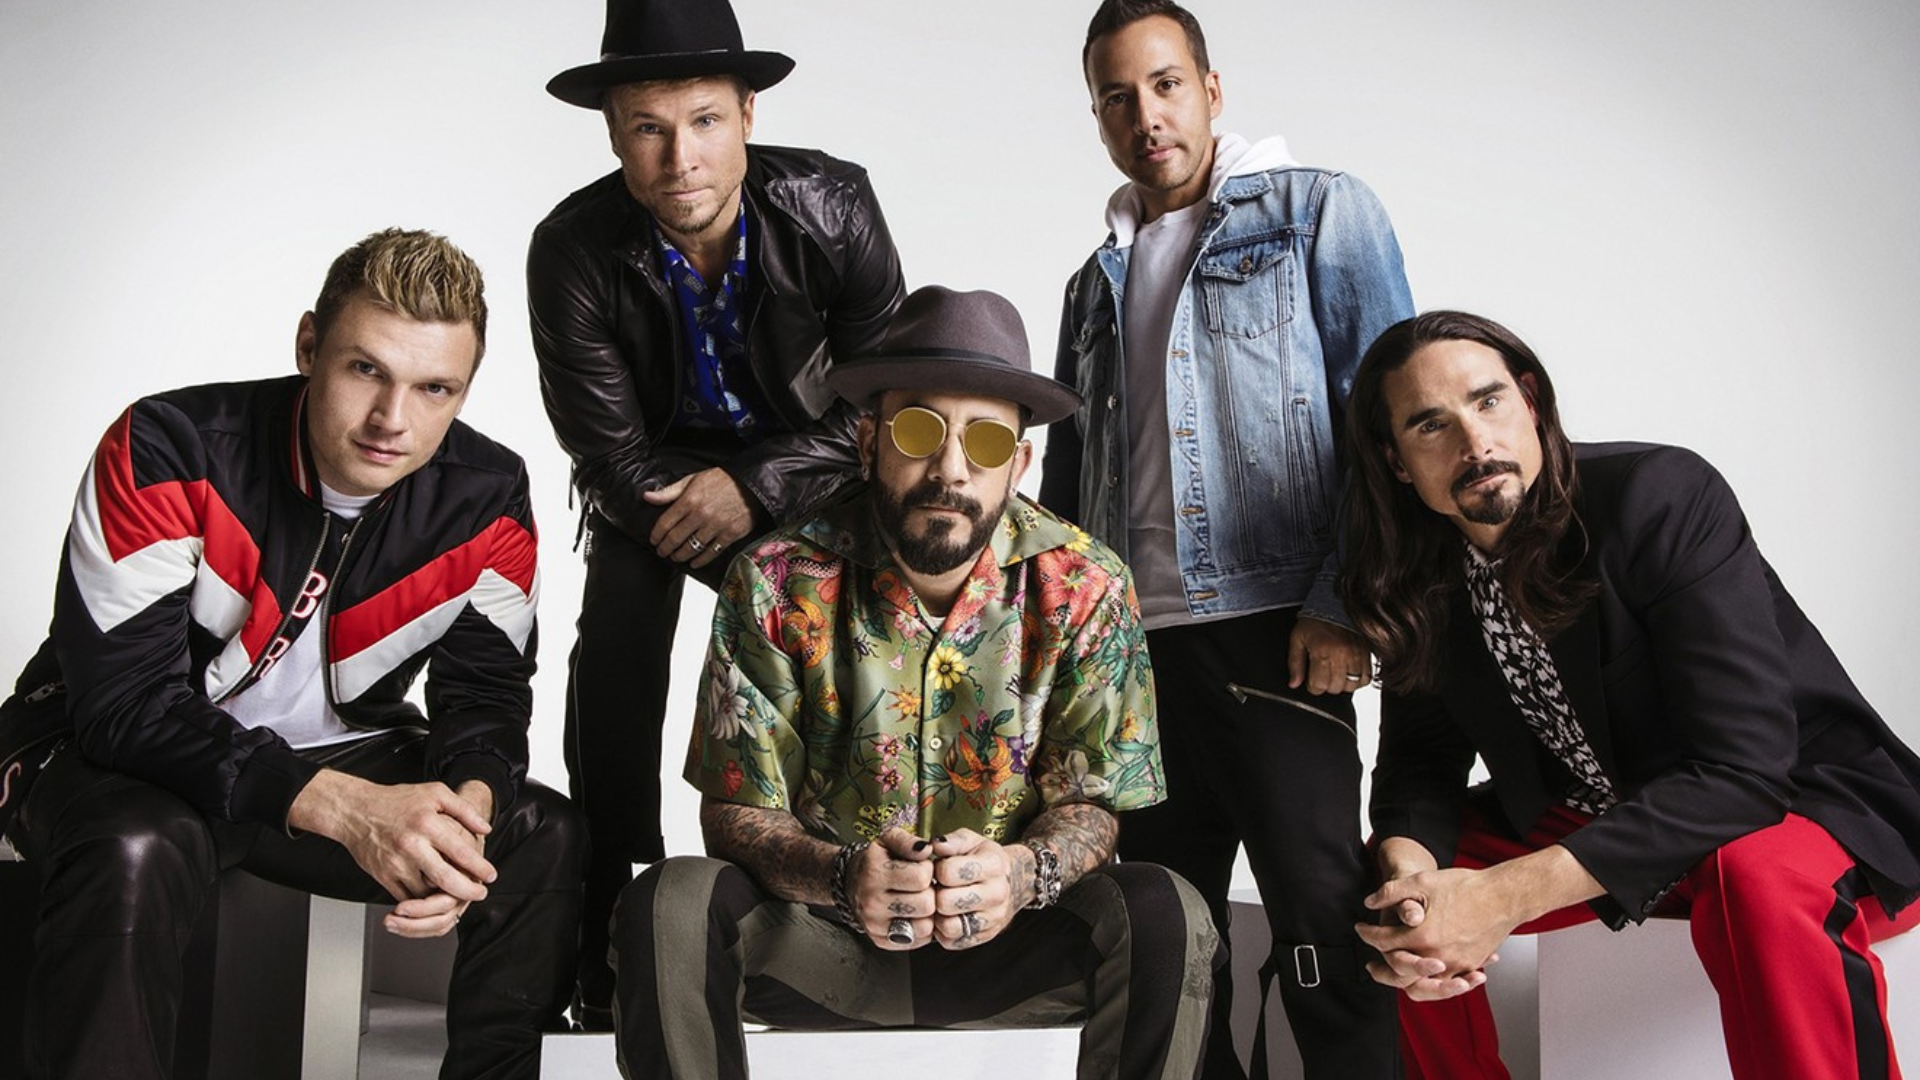 Backstreet Boys pay tribute to Aaron Carter at London concert: 'We